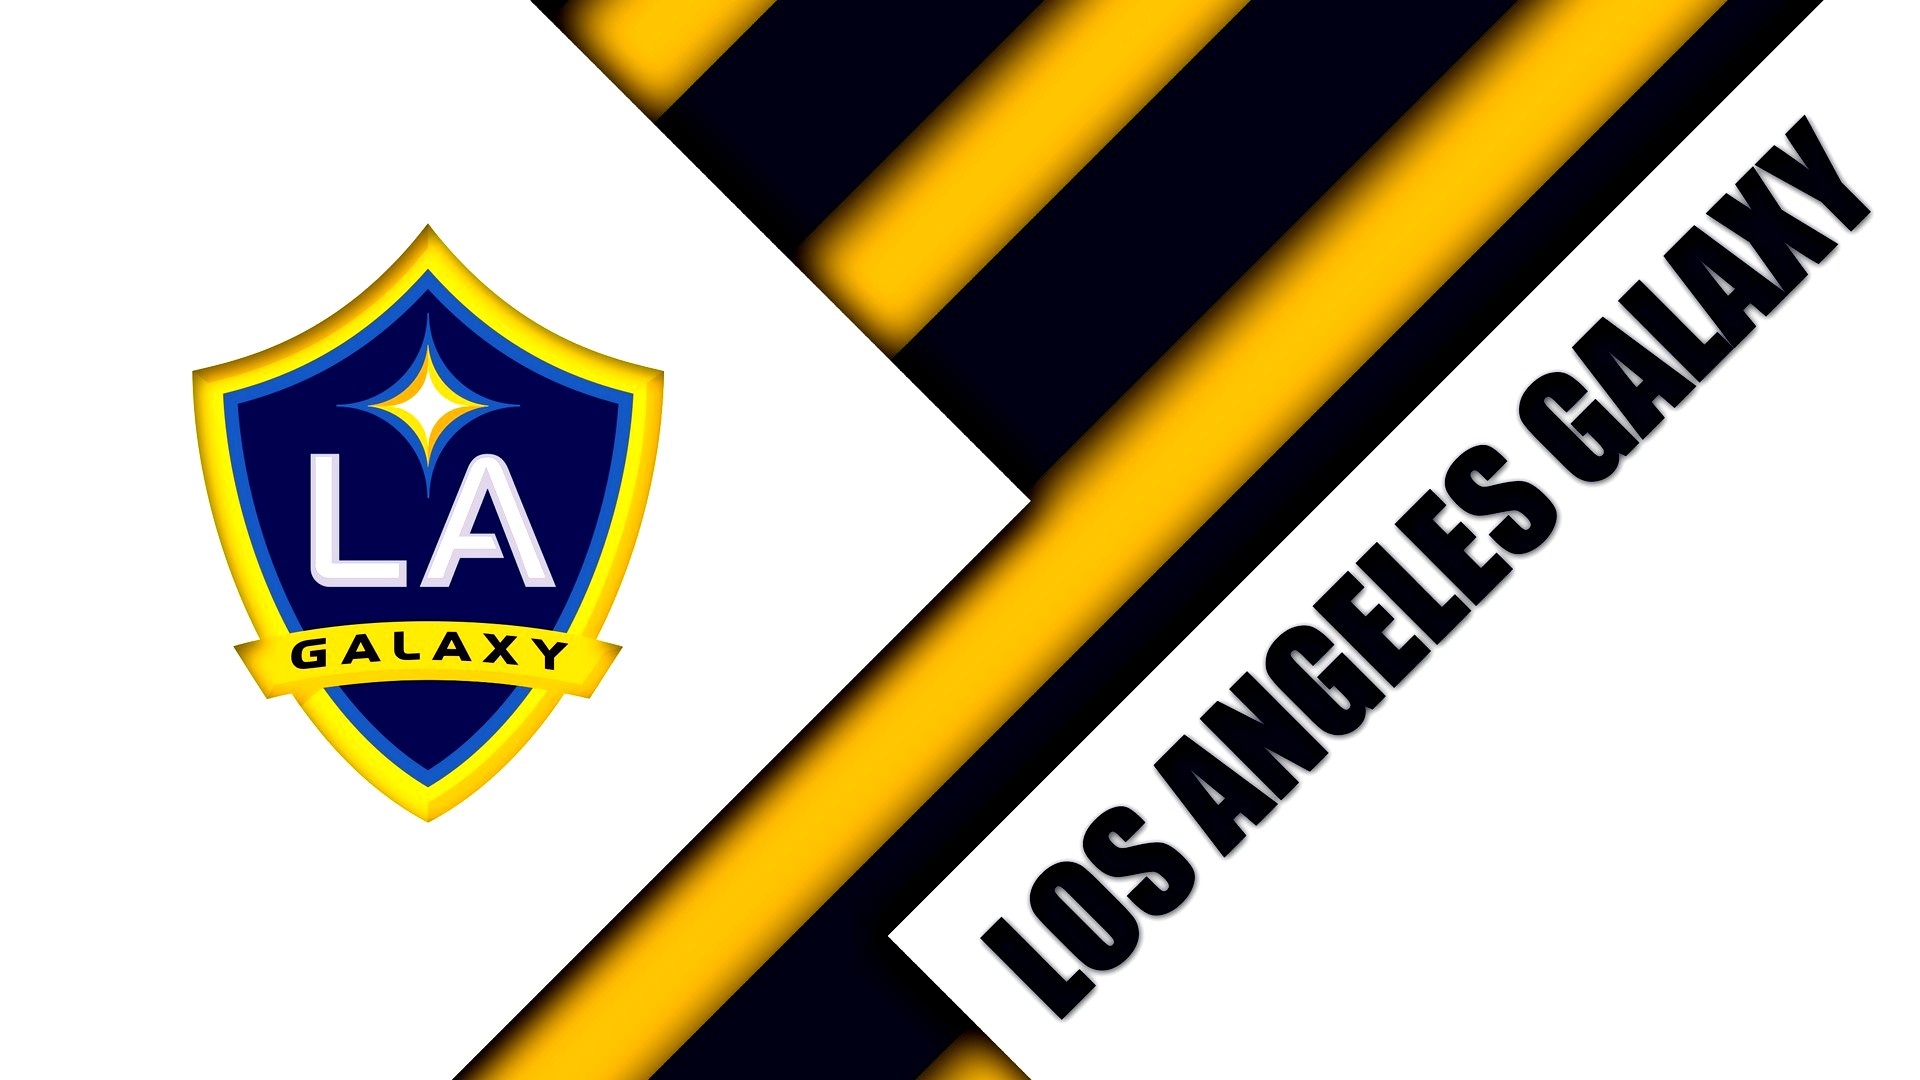 Los Angeles Galaxy For Mac Wallpaper with high-resolution 1920x1080 pixel. You can use this wallpaper for your Desktop Computers, Mac Screensavers, Windows Backgrounds, iPhone Wallpapers, Tablet or Android Lock screen and another Mobile device